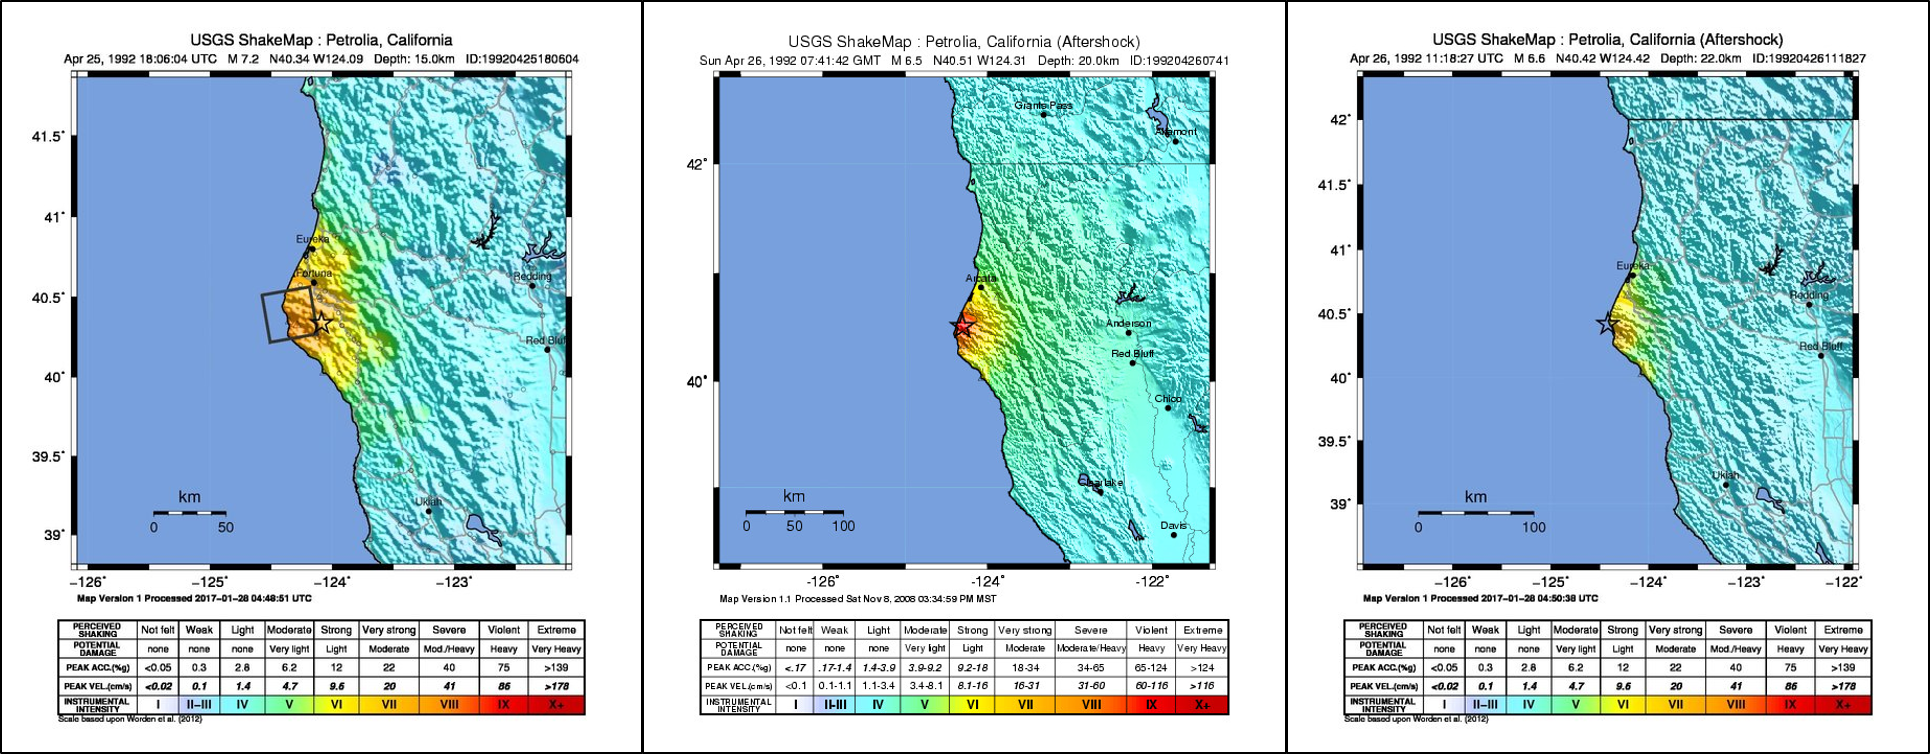 Collection of Shakemaps showing the shaking intensity for the three largest earthquakes